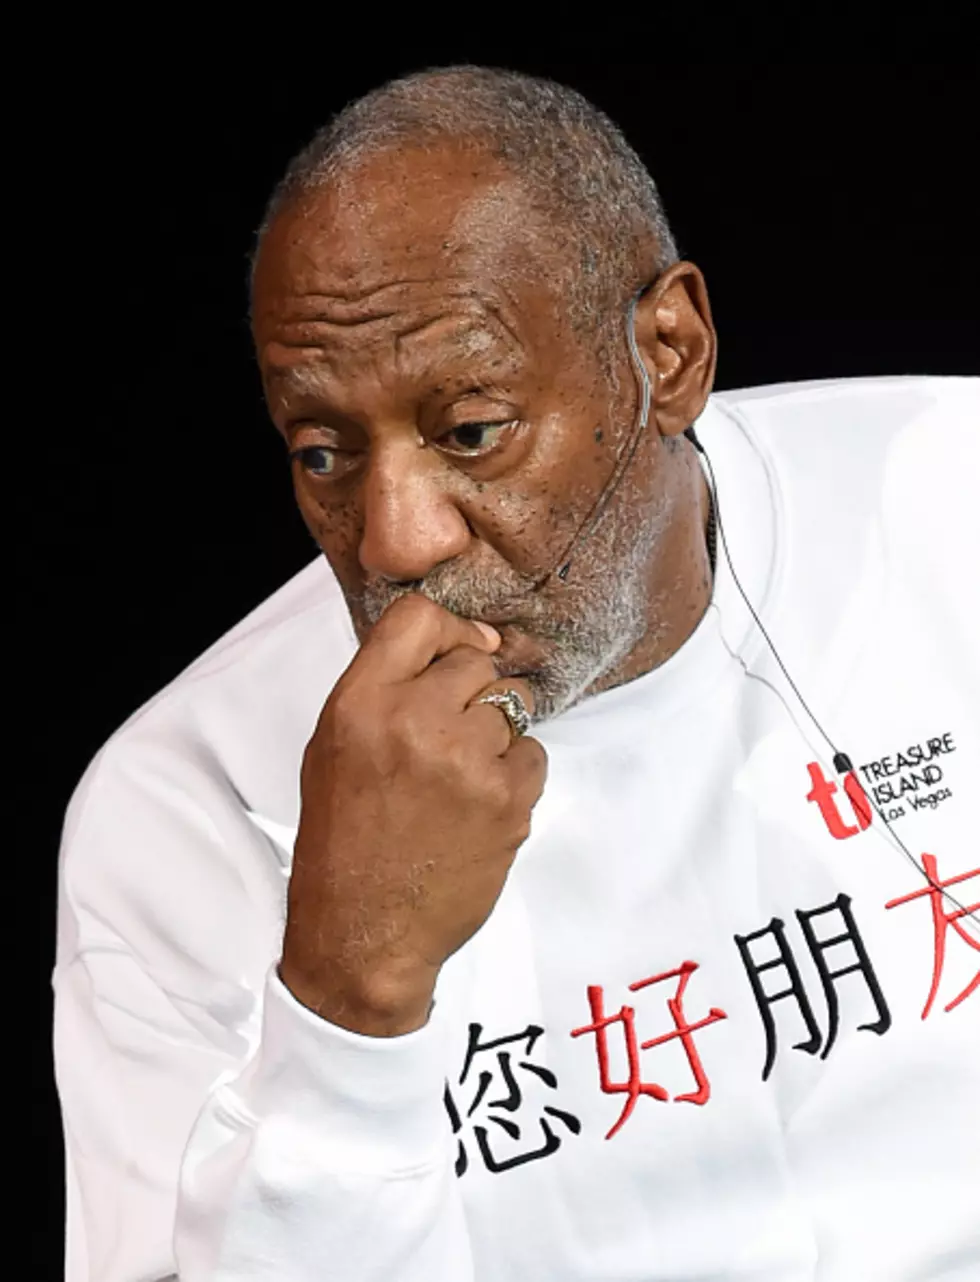 Bill Cosby 1969 Stand-Up Bit on Drugging Girls&#8217; Drinks [Audio]